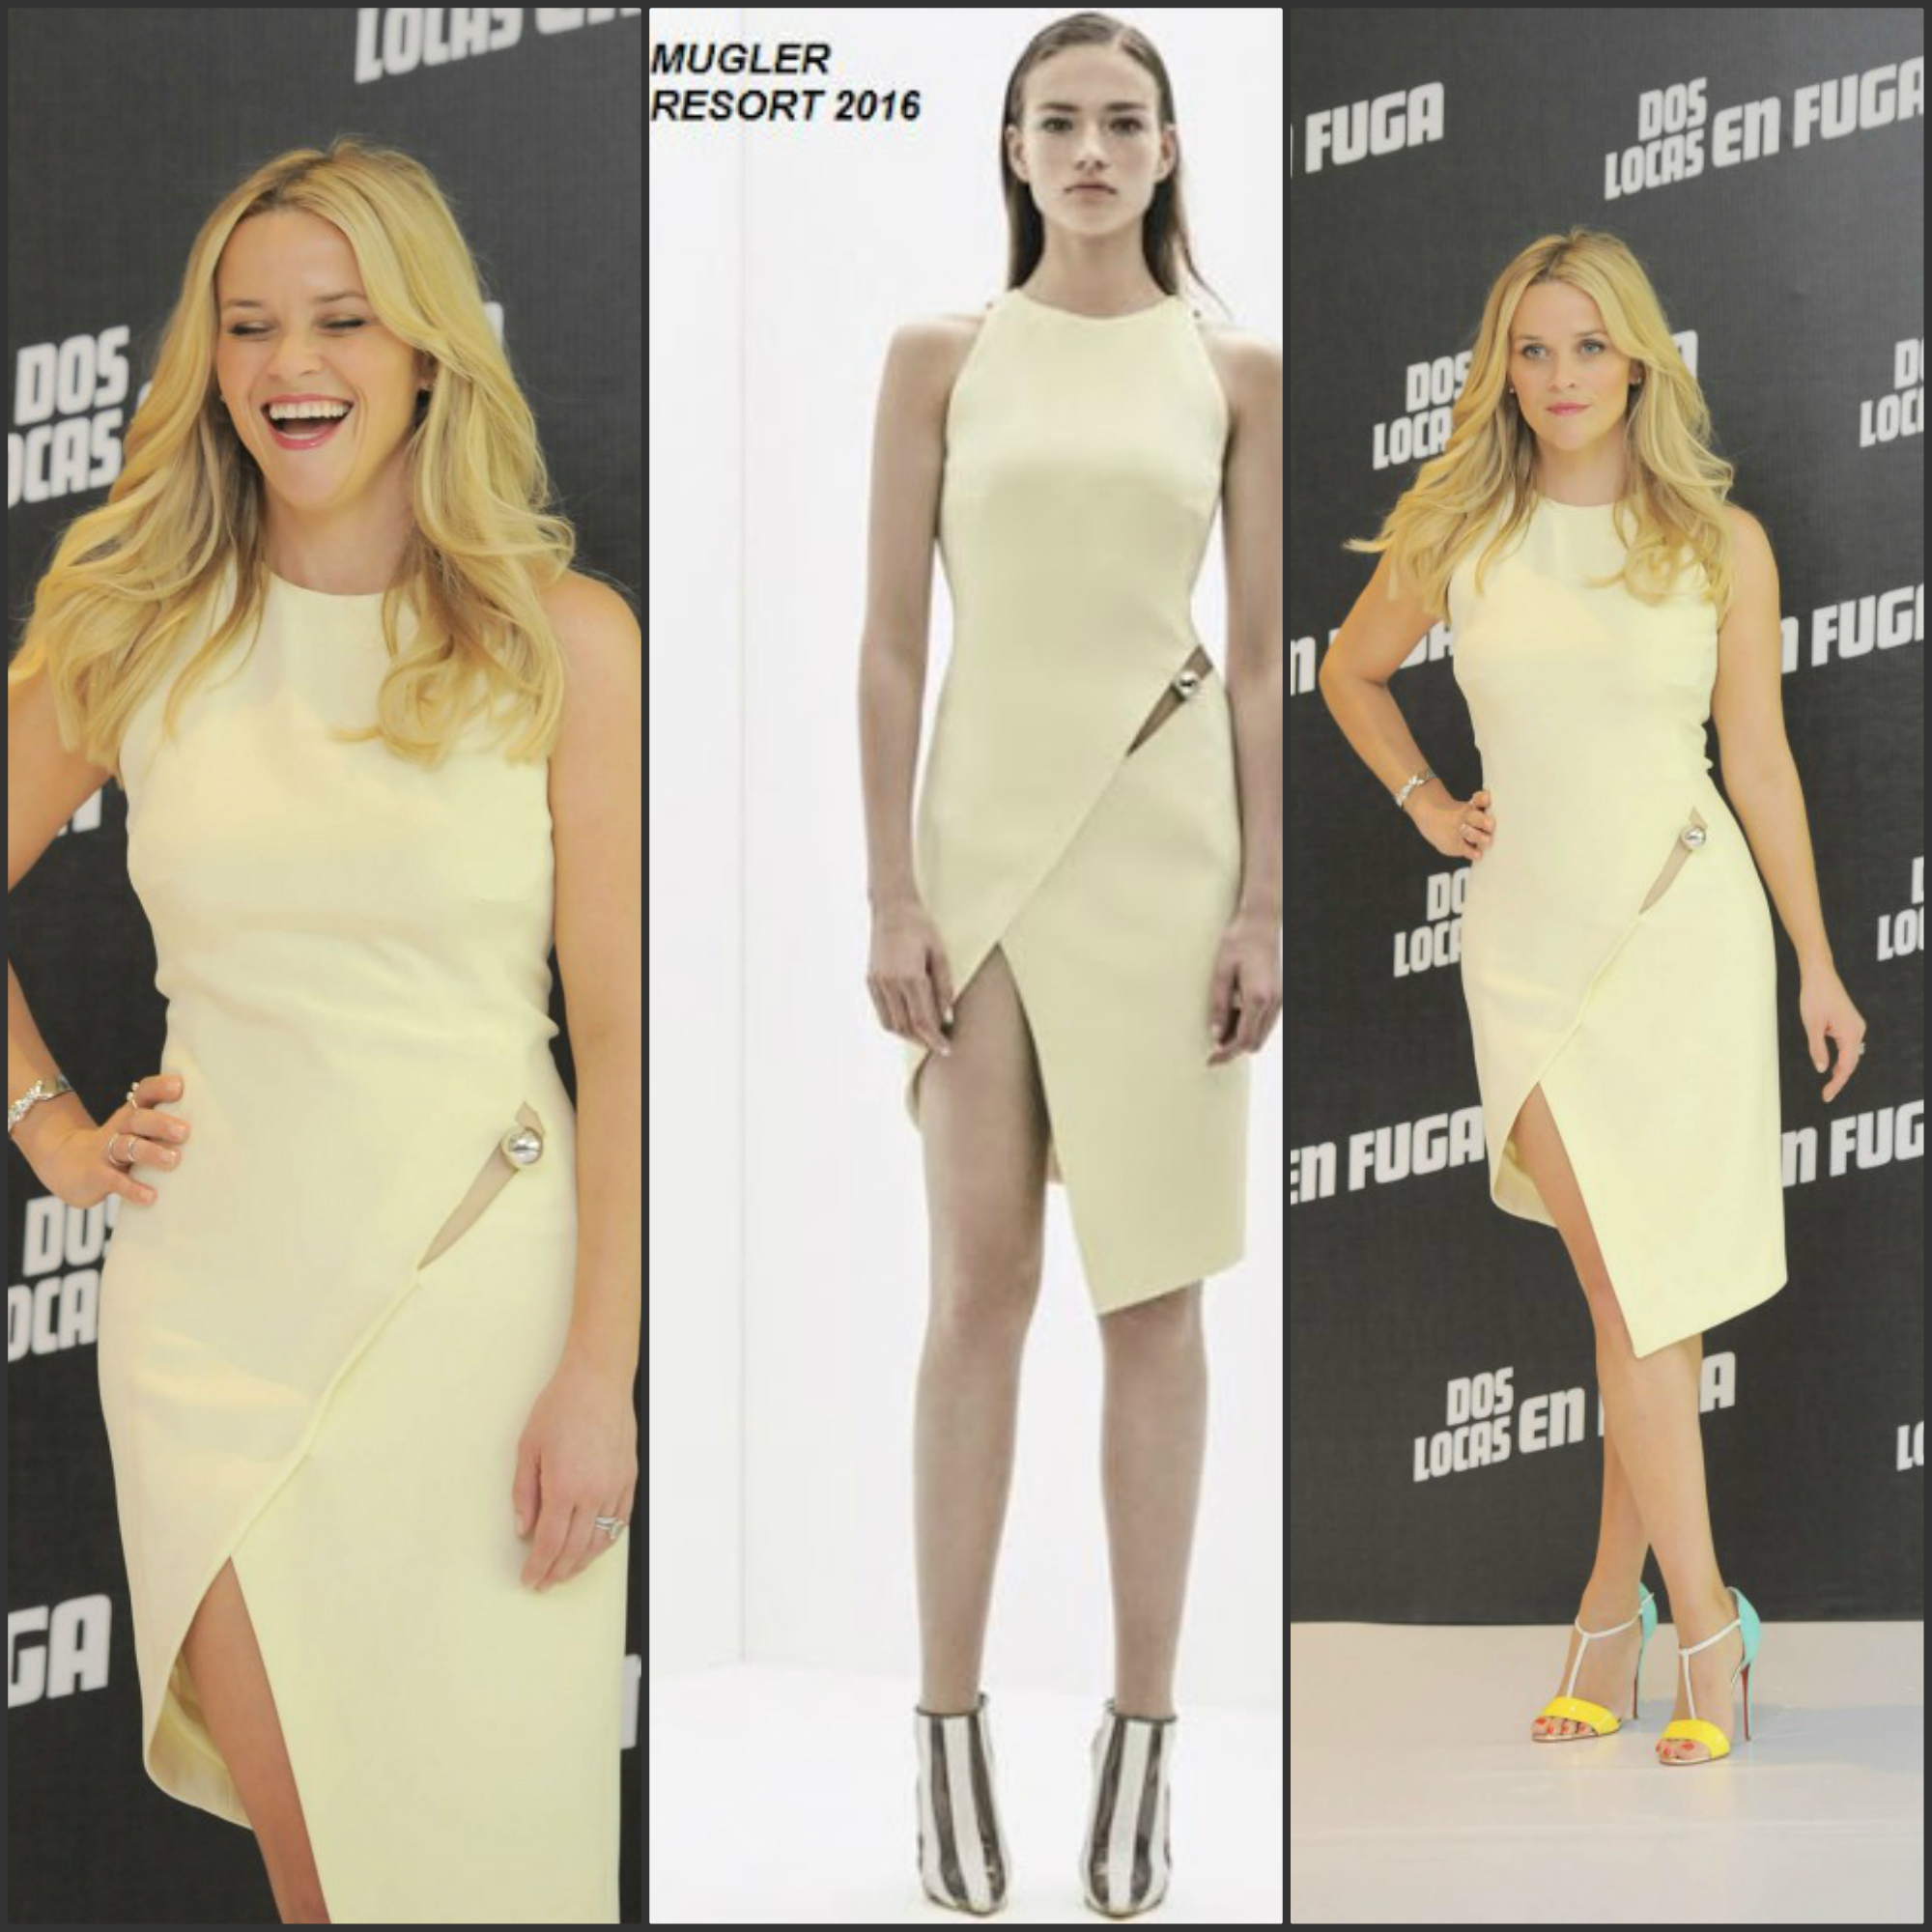 reese-witherspoon-in-mugler-at-hot-pursuit-mexico-city-photocall (1)